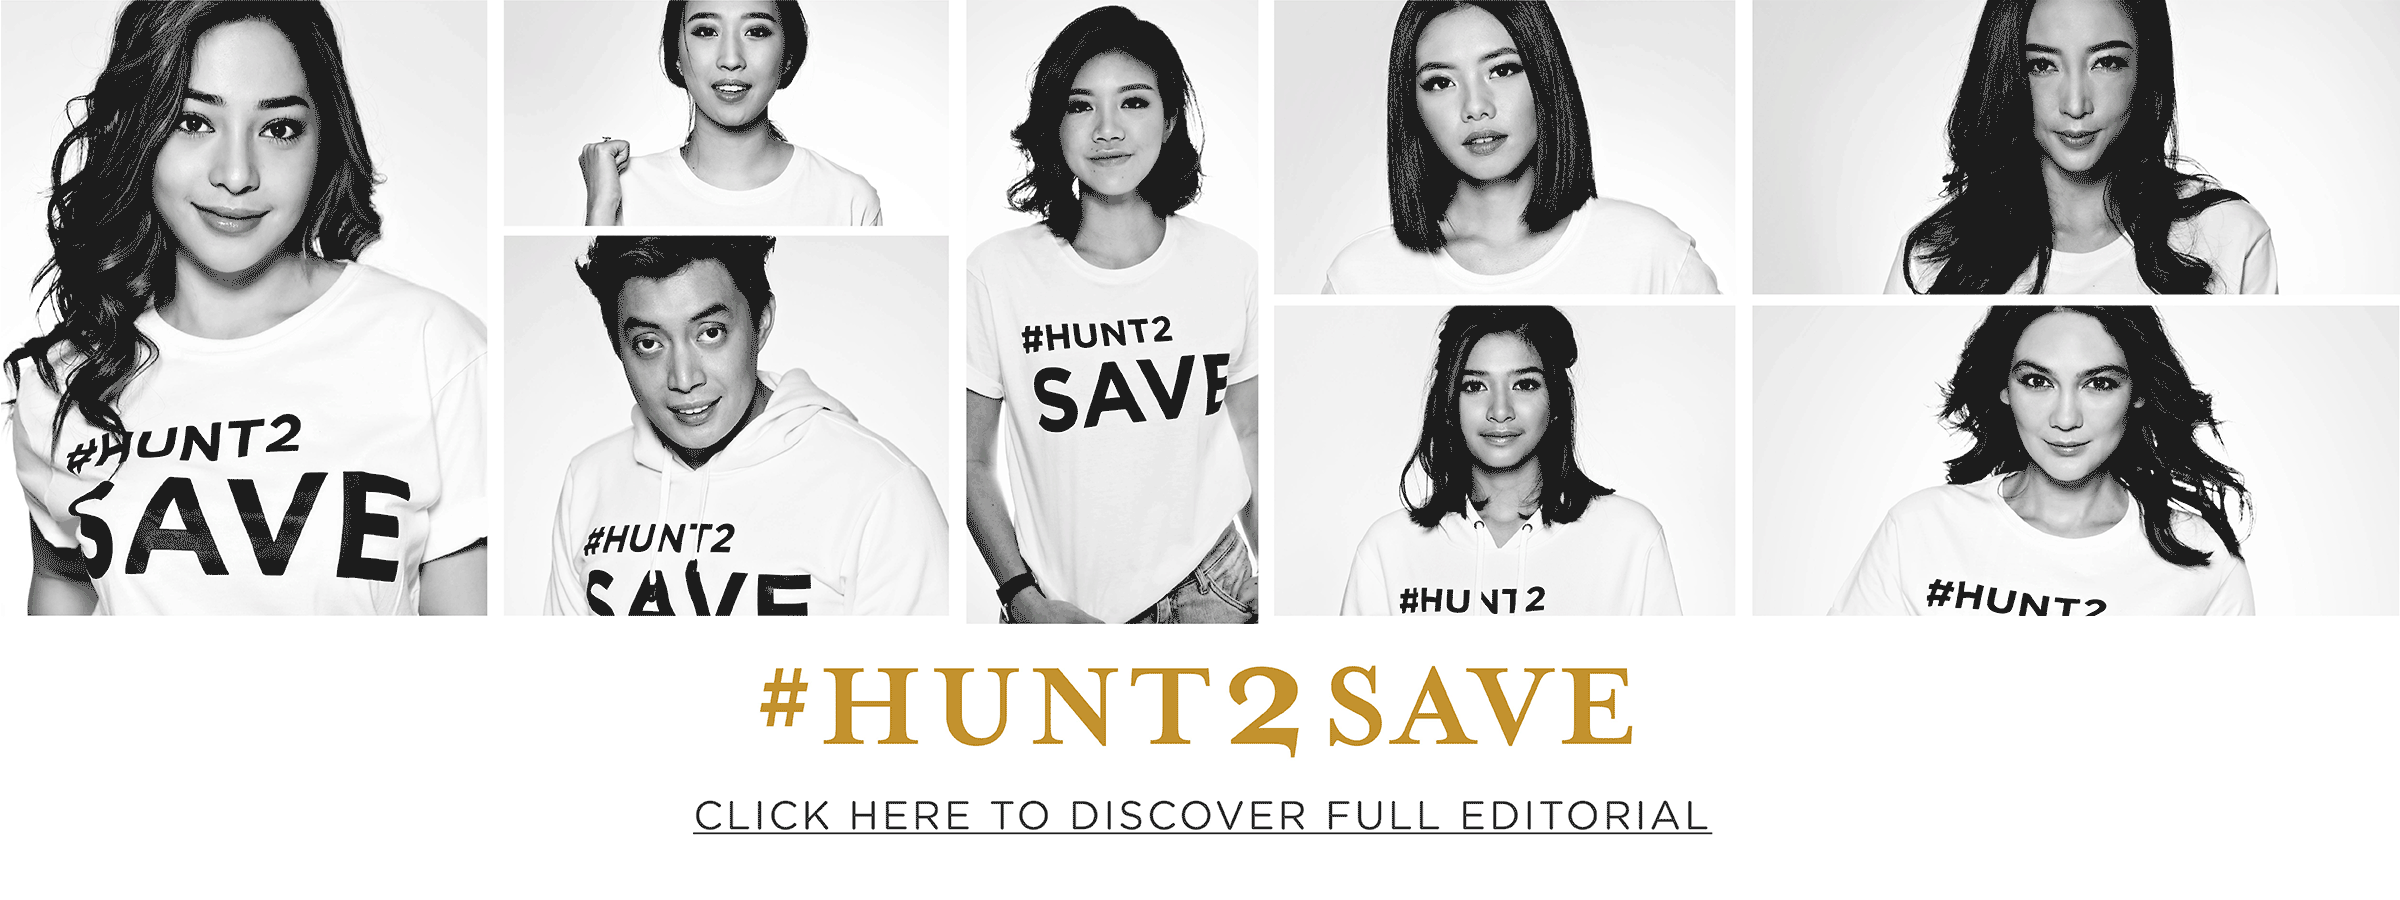 #Hunt2Save - Be A Part of The Change